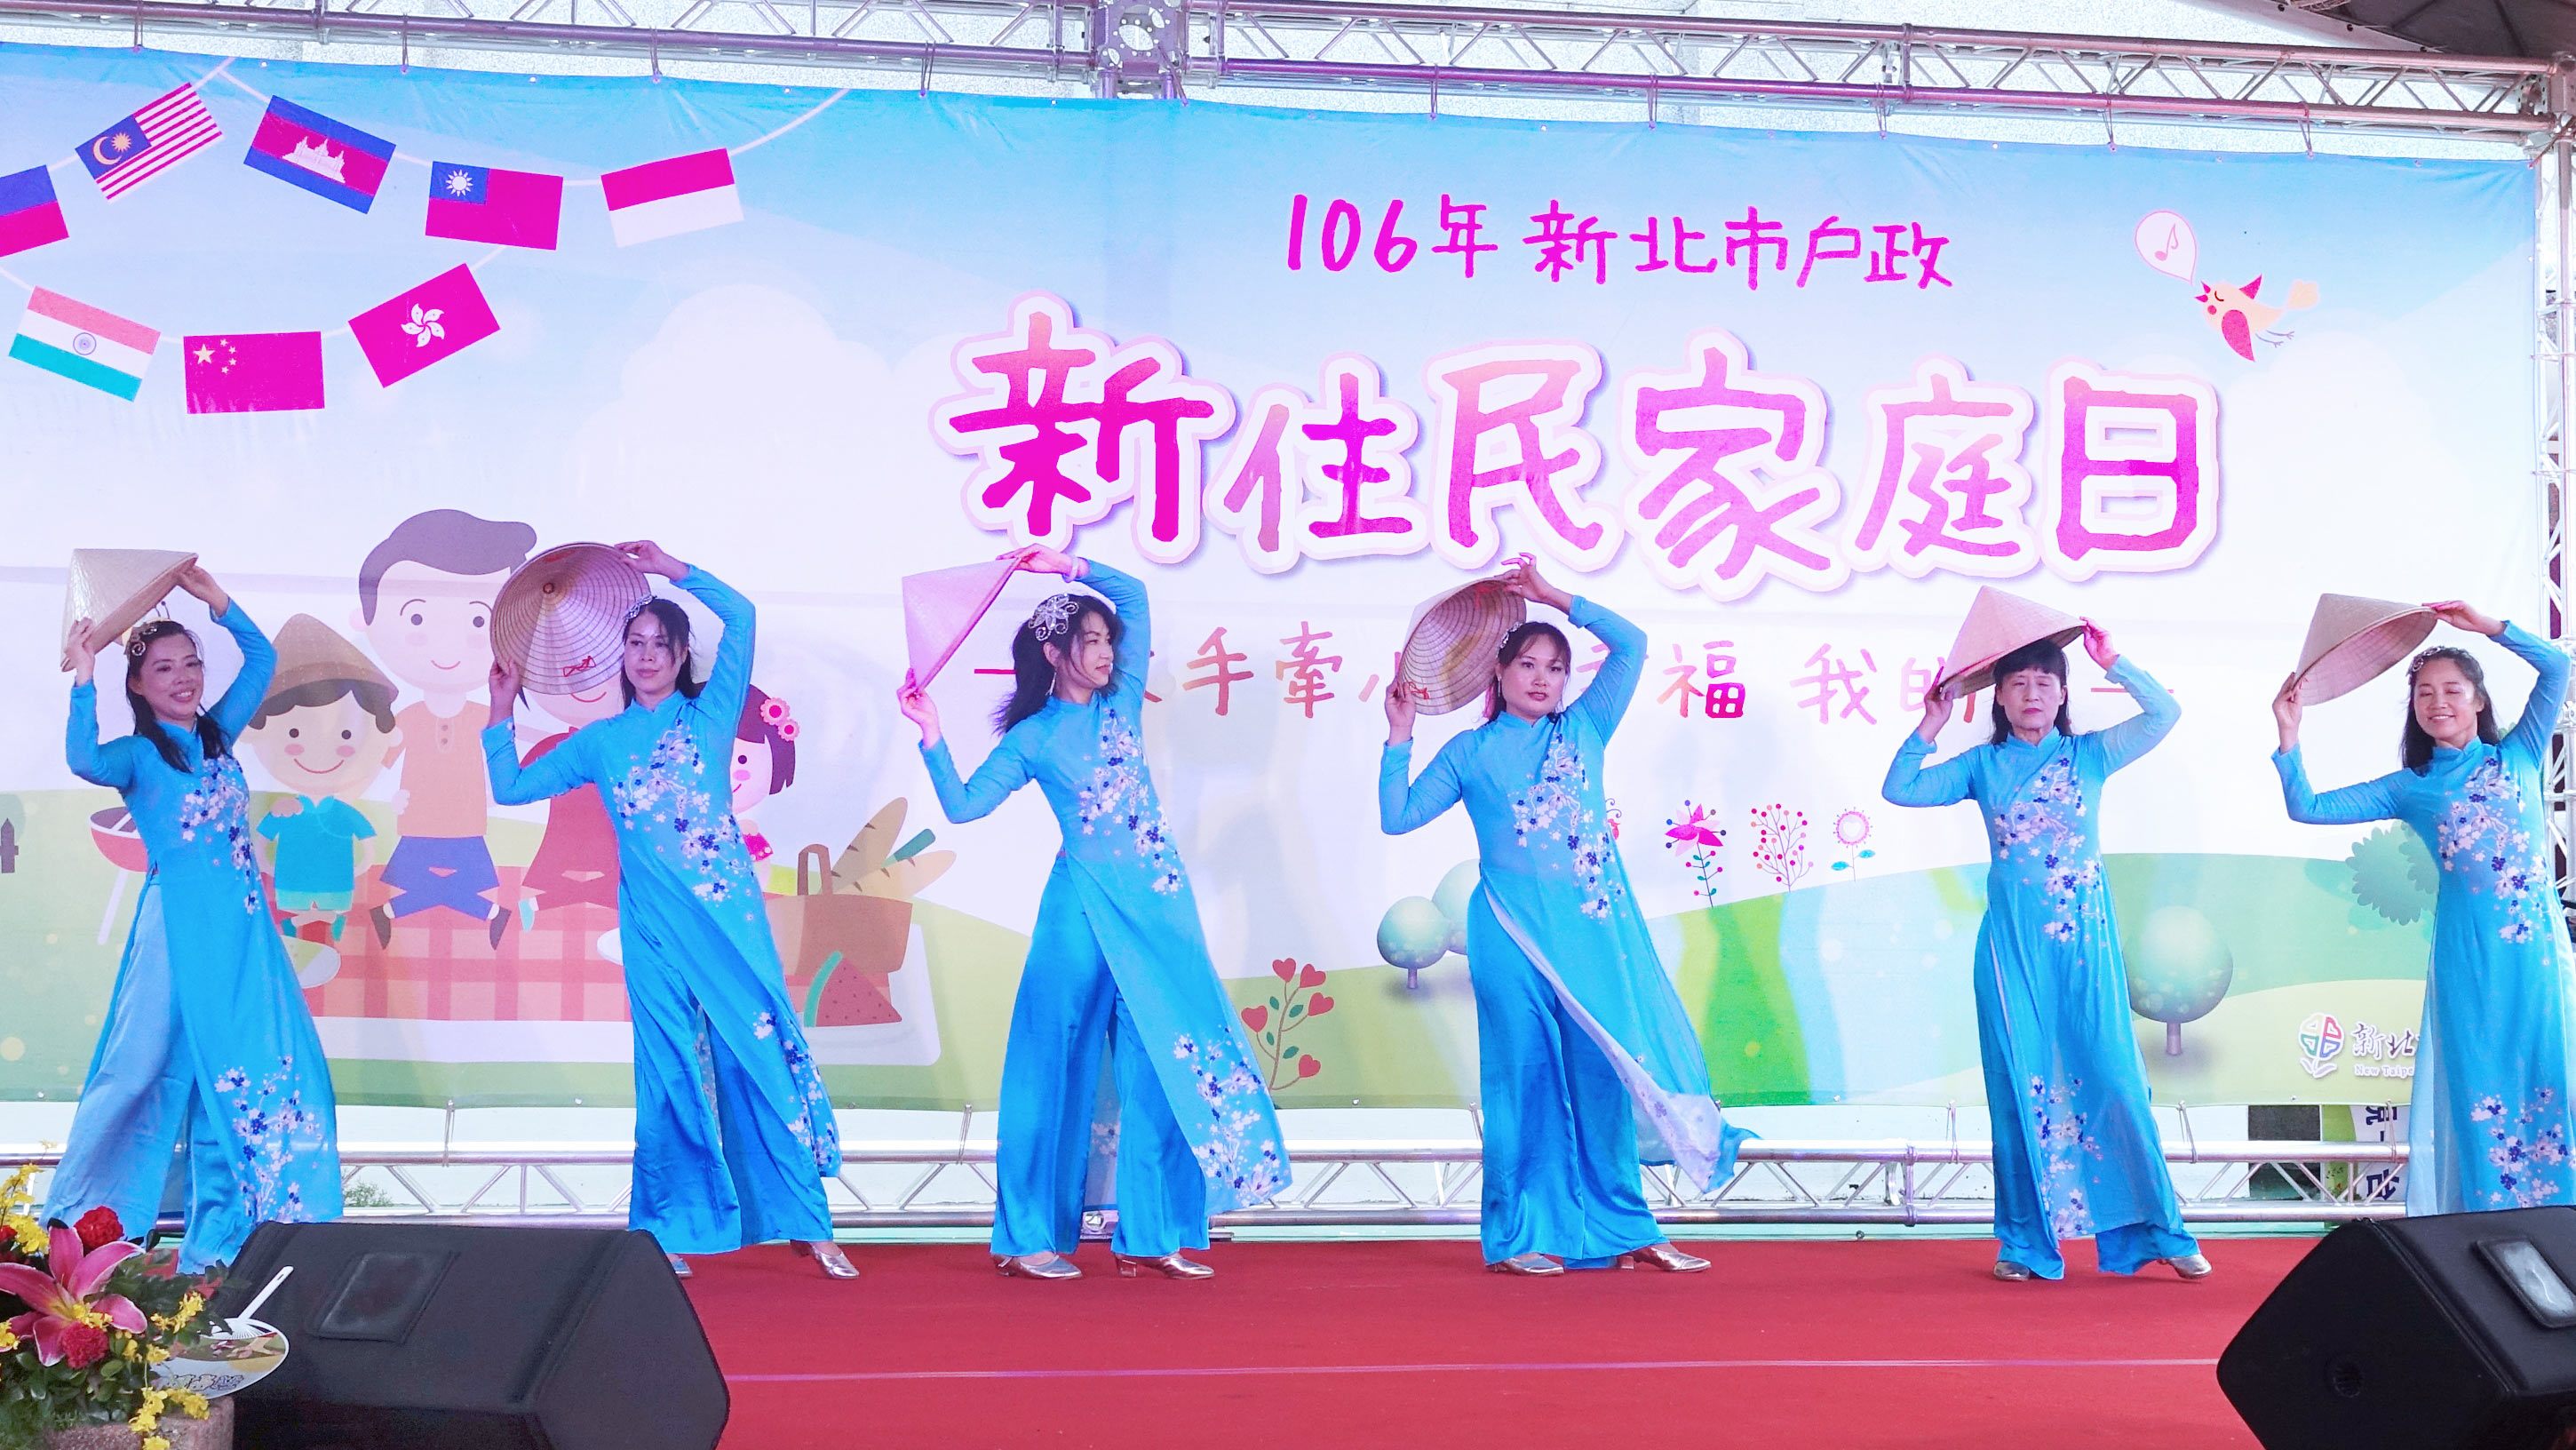 JW Dance Group put a show on Vietnamese Traditional Dance